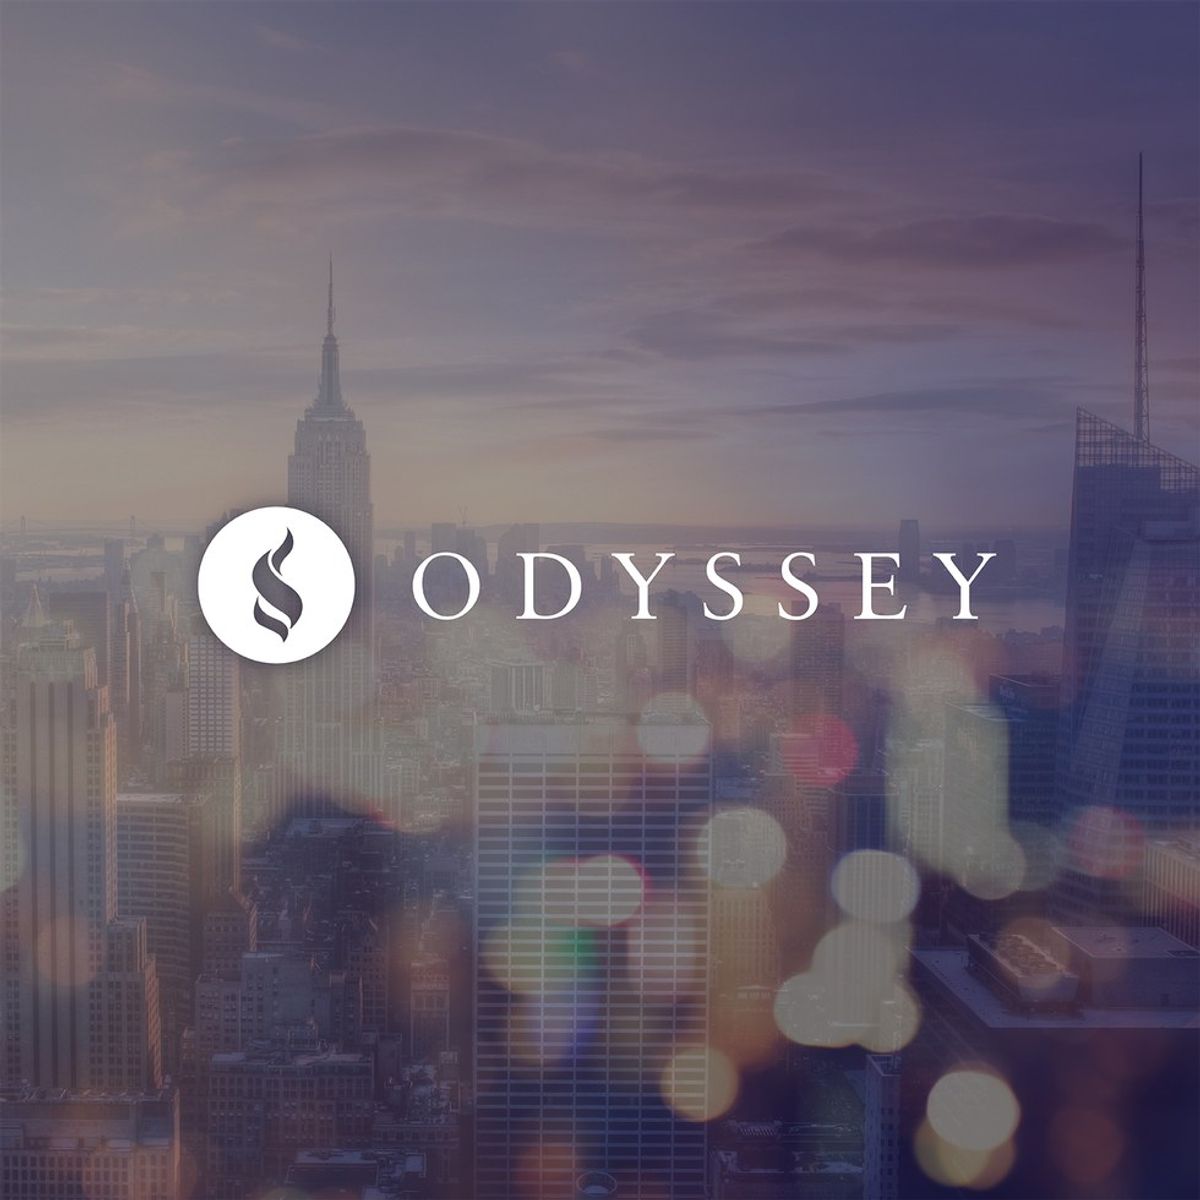 My Year of Writing at Odyssey